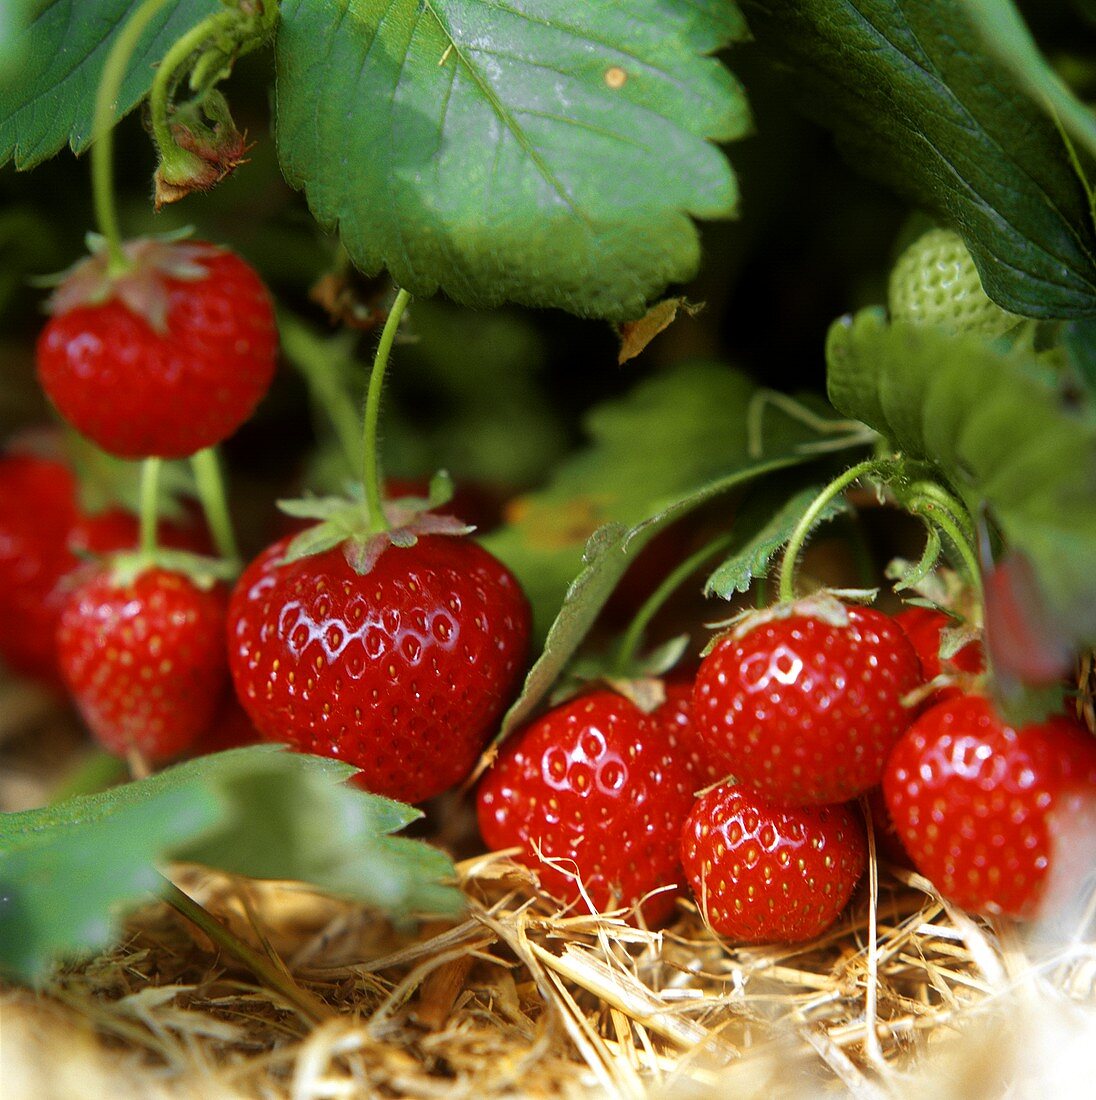 Ripe strawberries on the plant